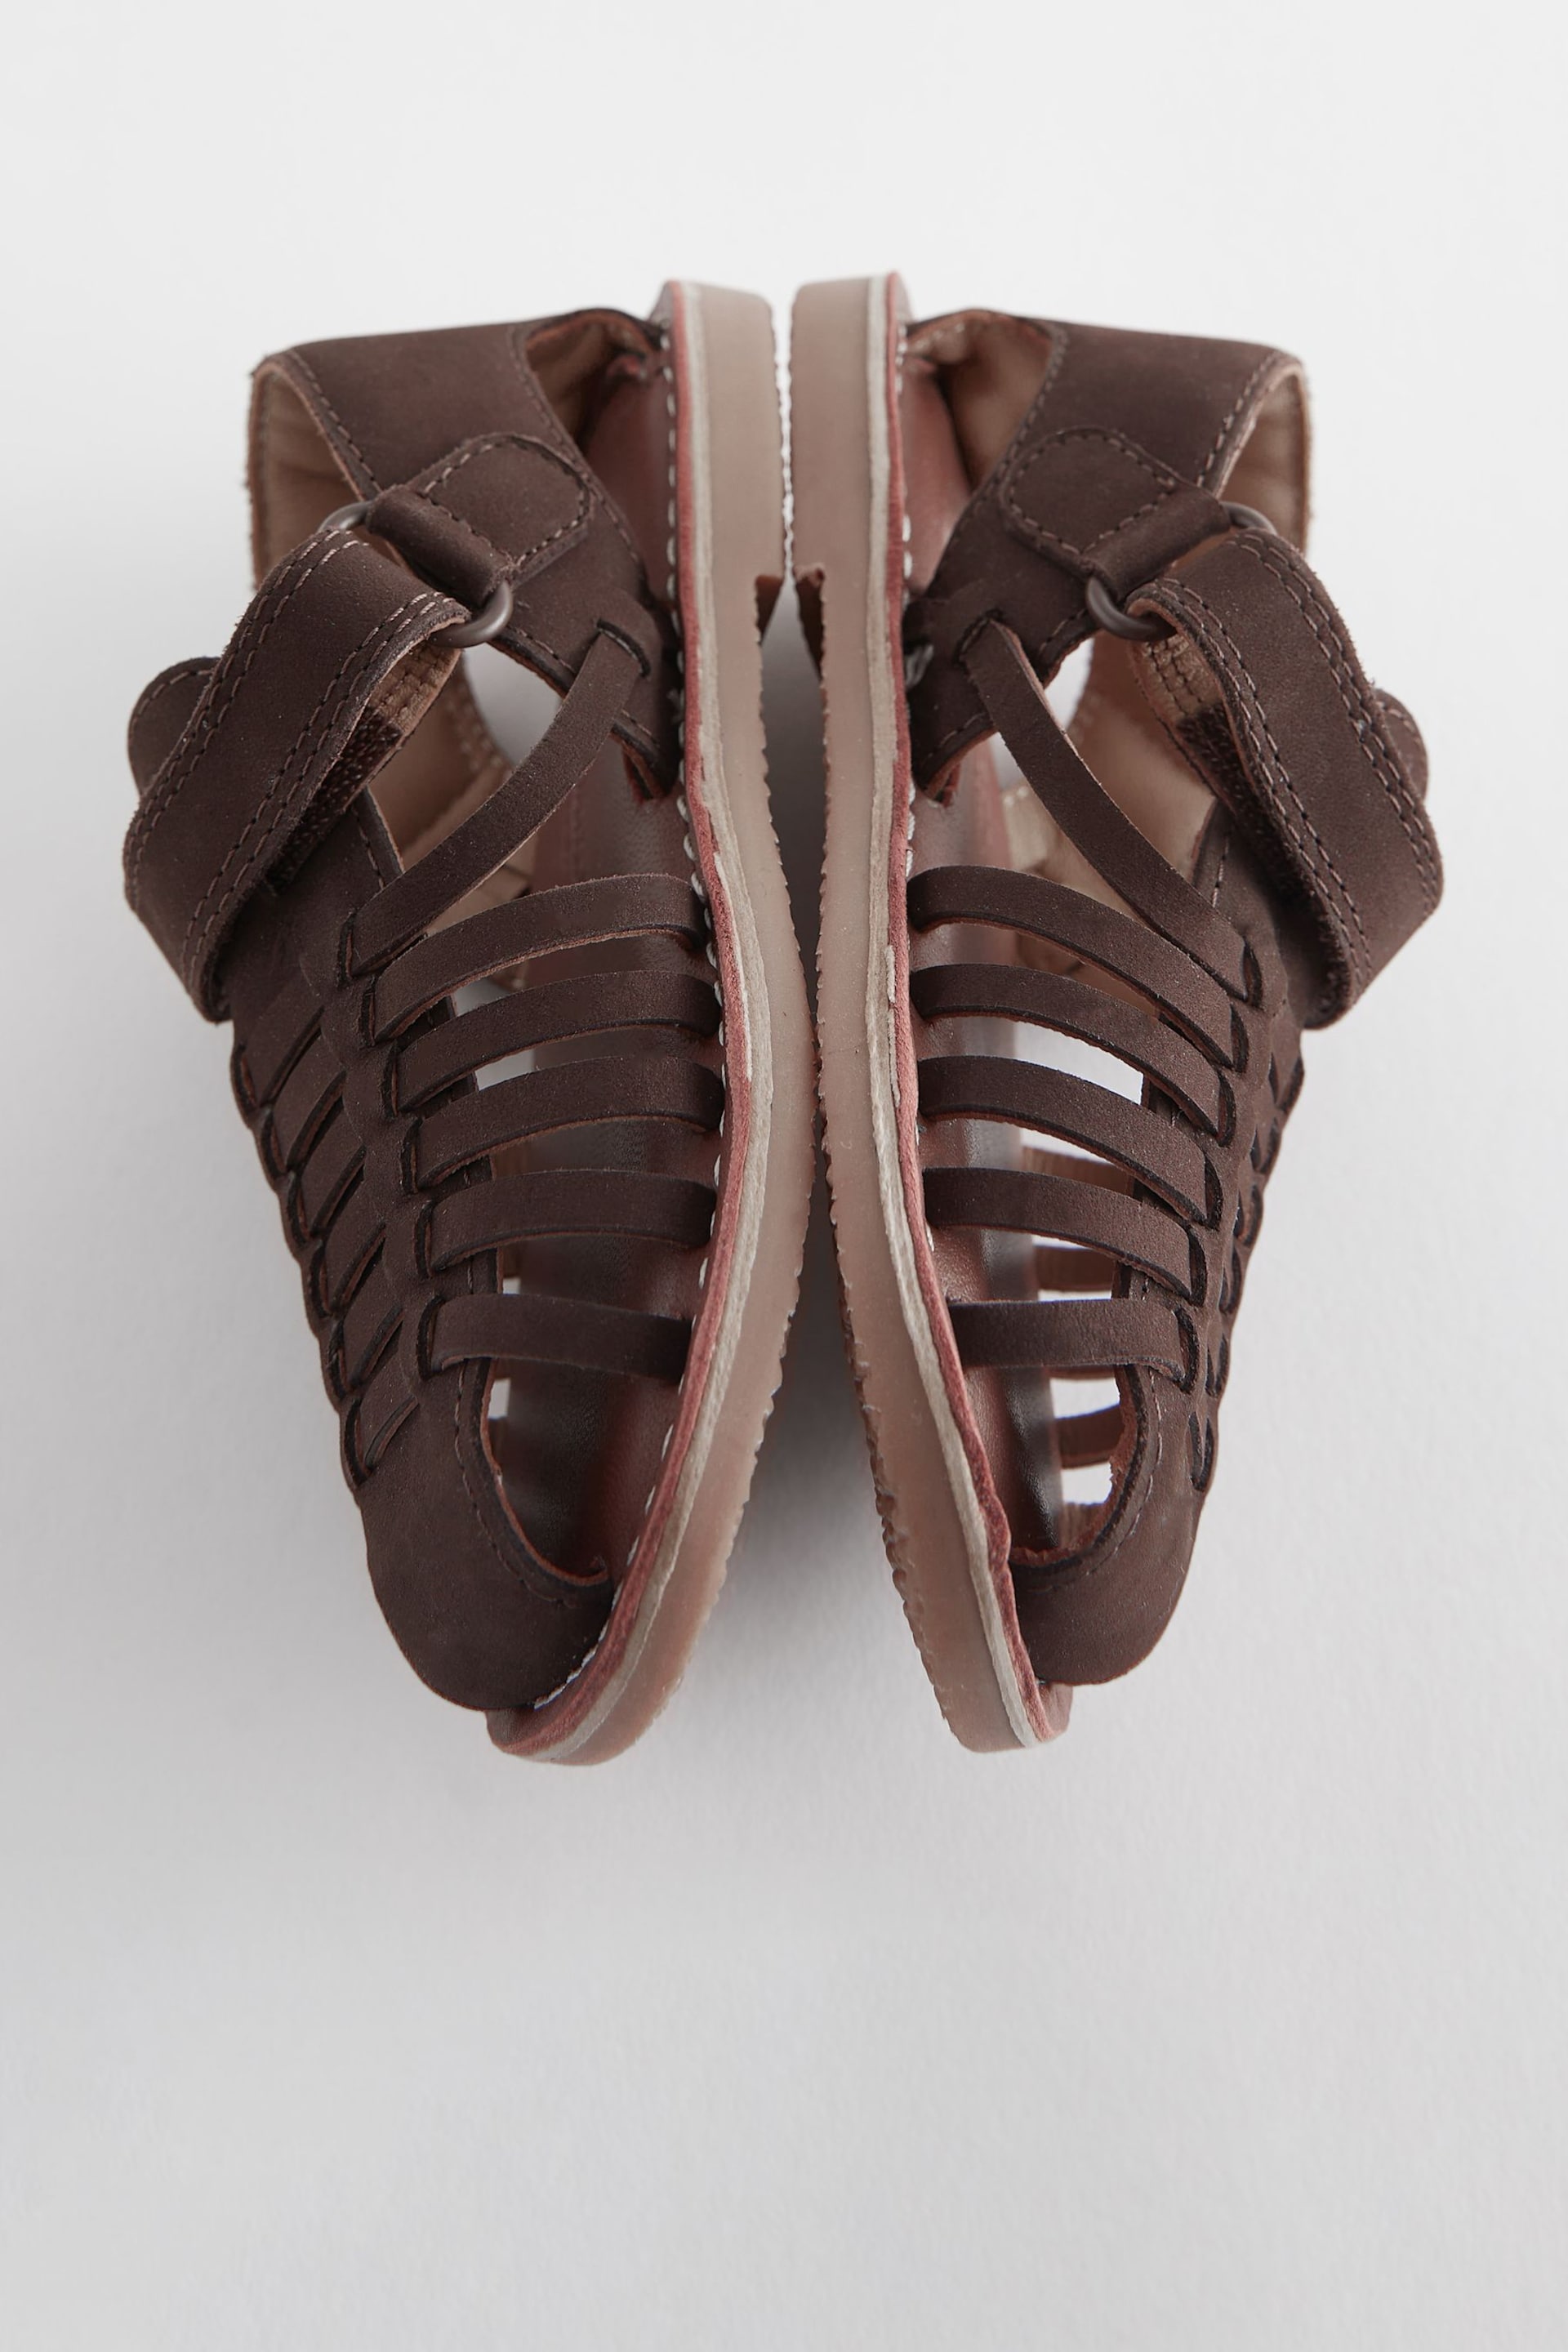 Chocolate Brown Leather Closed Toe Sandals - Image 4 of 5